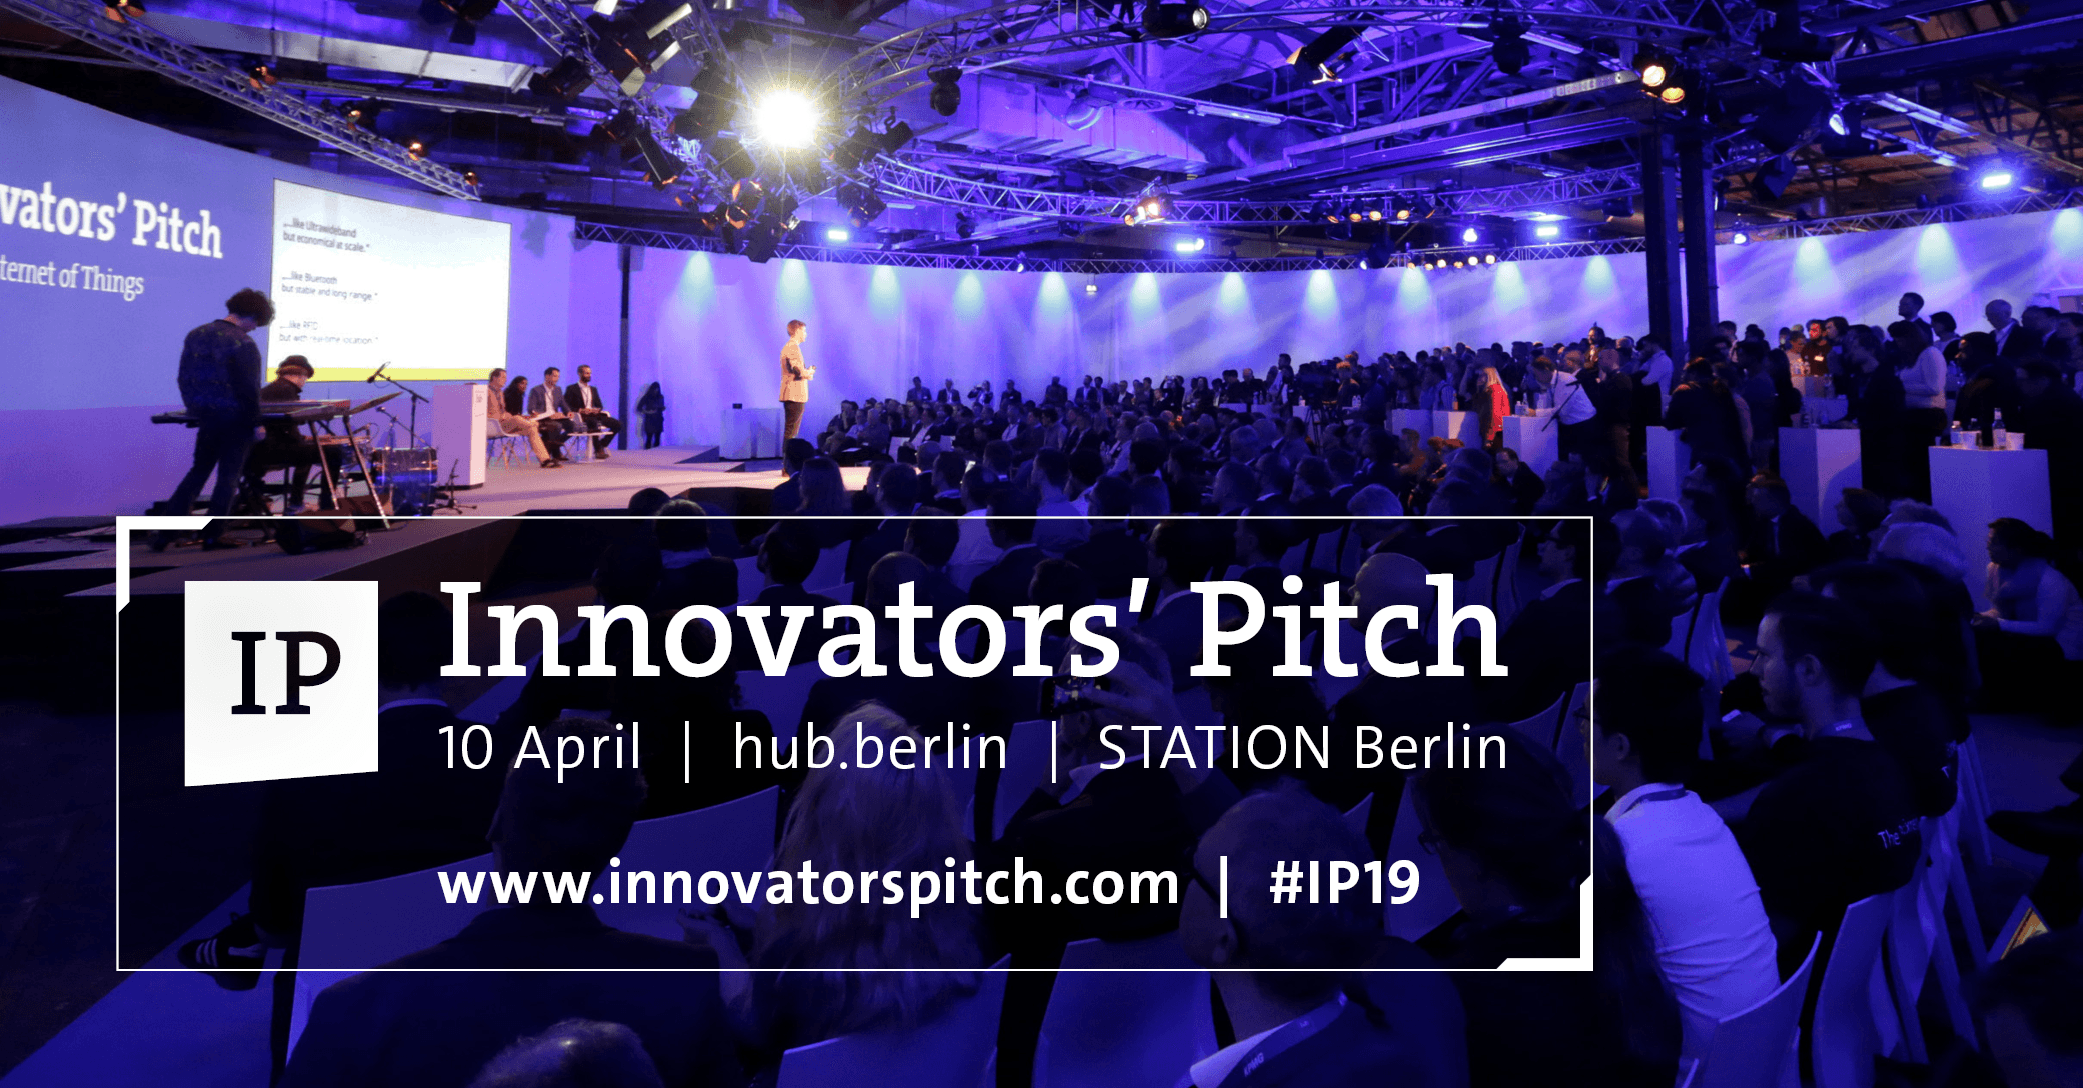 The Innovators’ Pitch - 10th of April 2019 at STATION Berlin